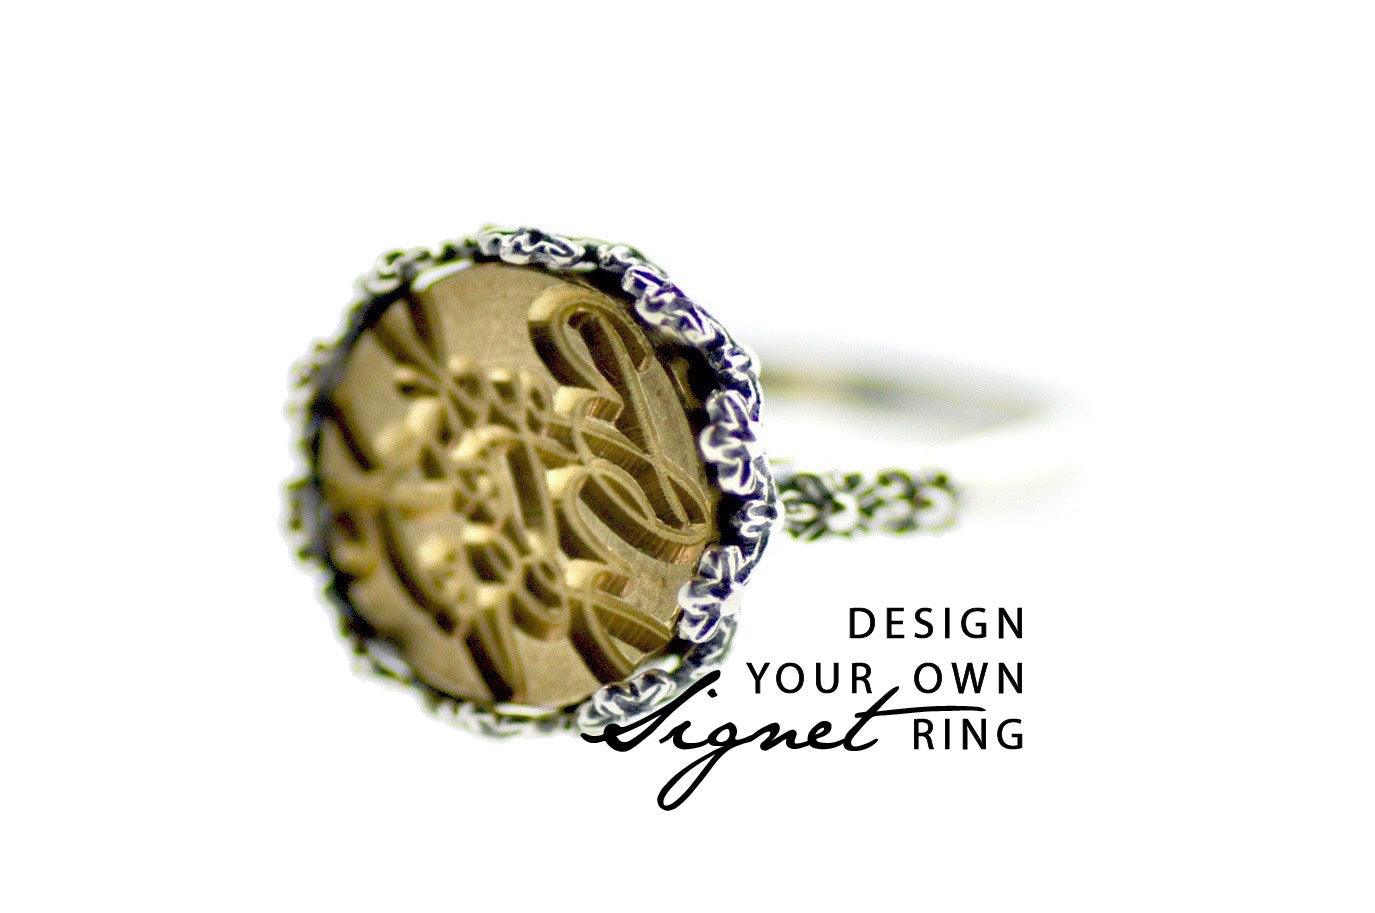 Design your own 12mm Flower Crown Signet Ring - Backtozero B20 - 12fc, 12mm, 12mm ring, accessory, Crown, Custom, custom ring, customsignet, Design Your Own, floral, Flower, her, jewelry, size 6, size 7, size 8, wax seal, wax seal ring, wax seal stamp